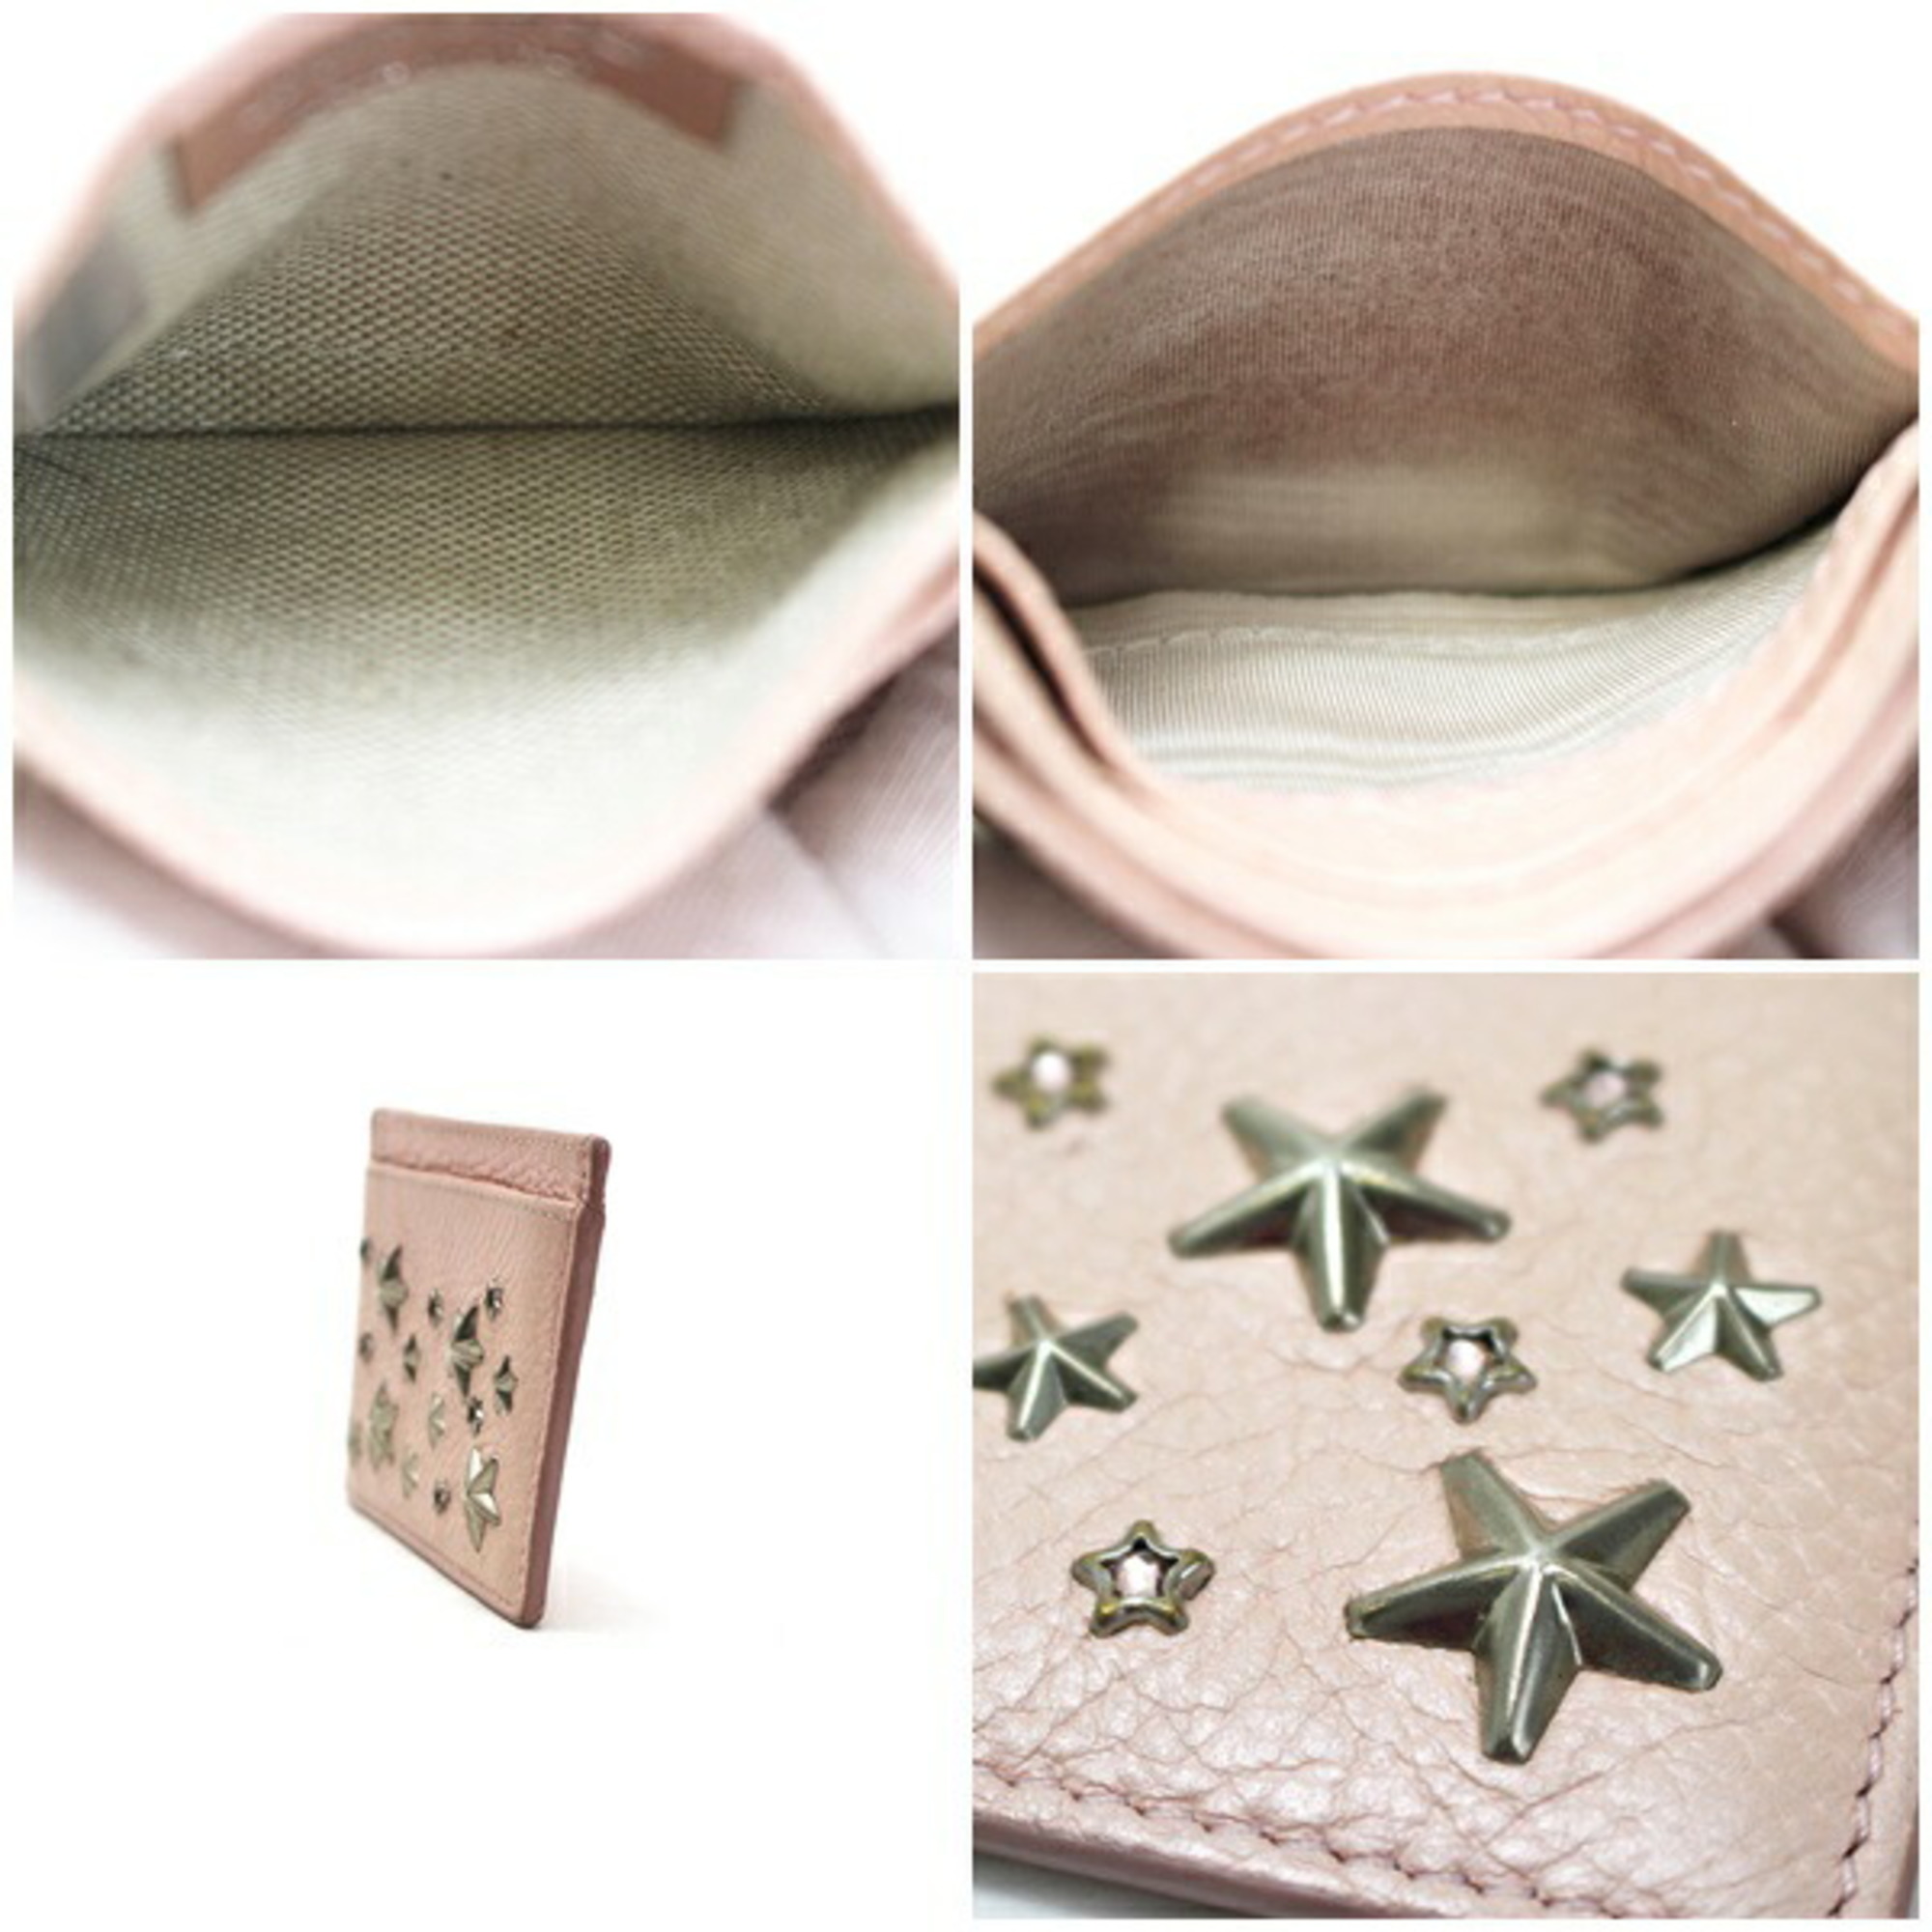 Jimmy Choo Card Case Pass Studs Leather Pink For JIMMY CHOO Ladies Type